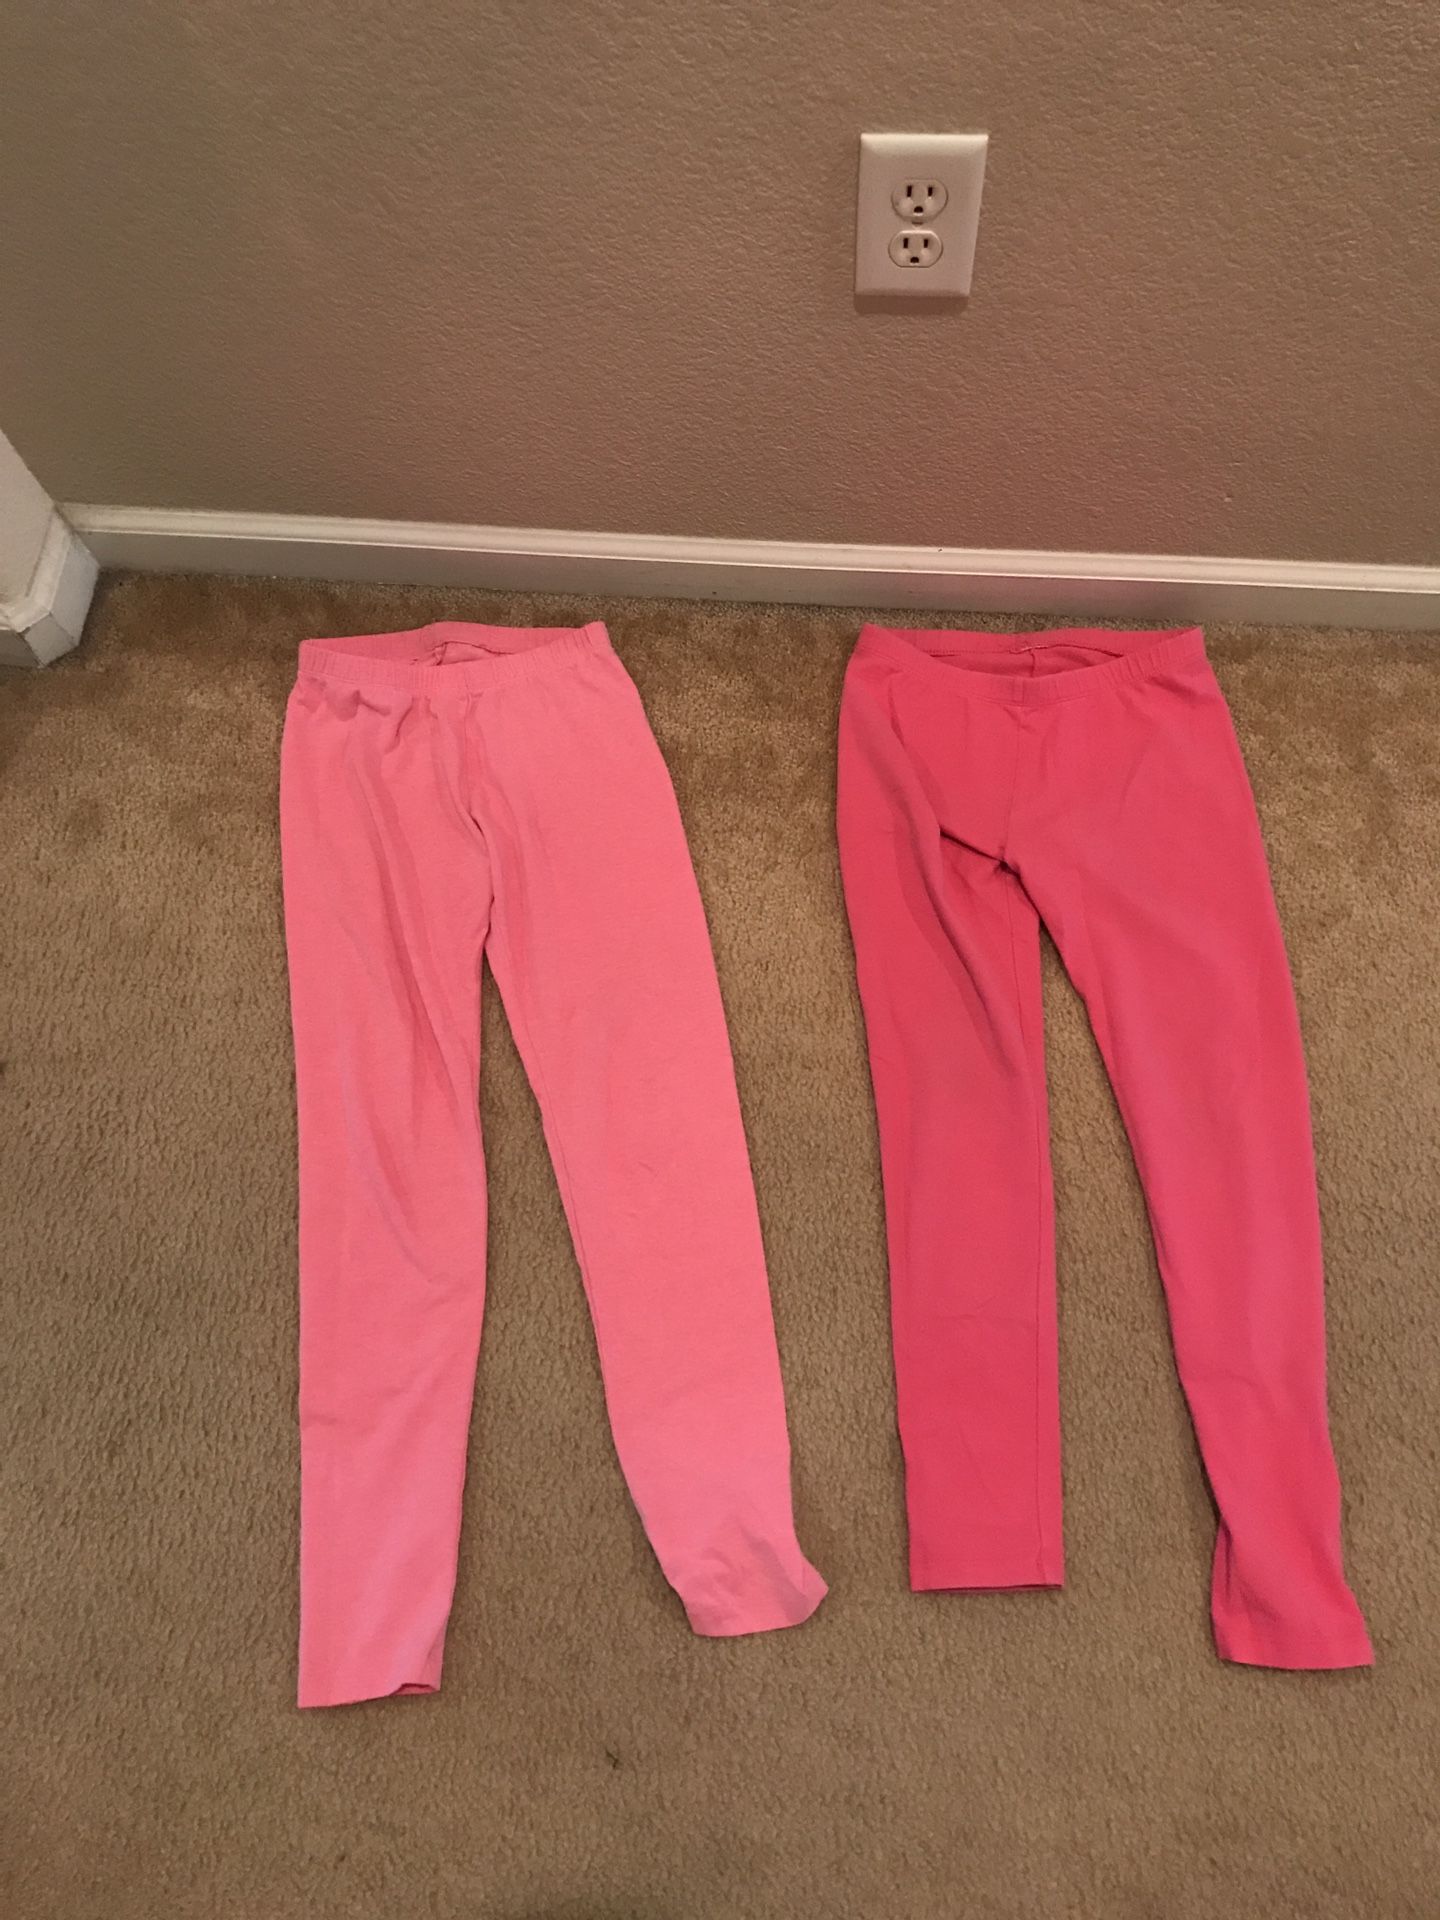 Young Girl’s Leggings (Size: 10/12)